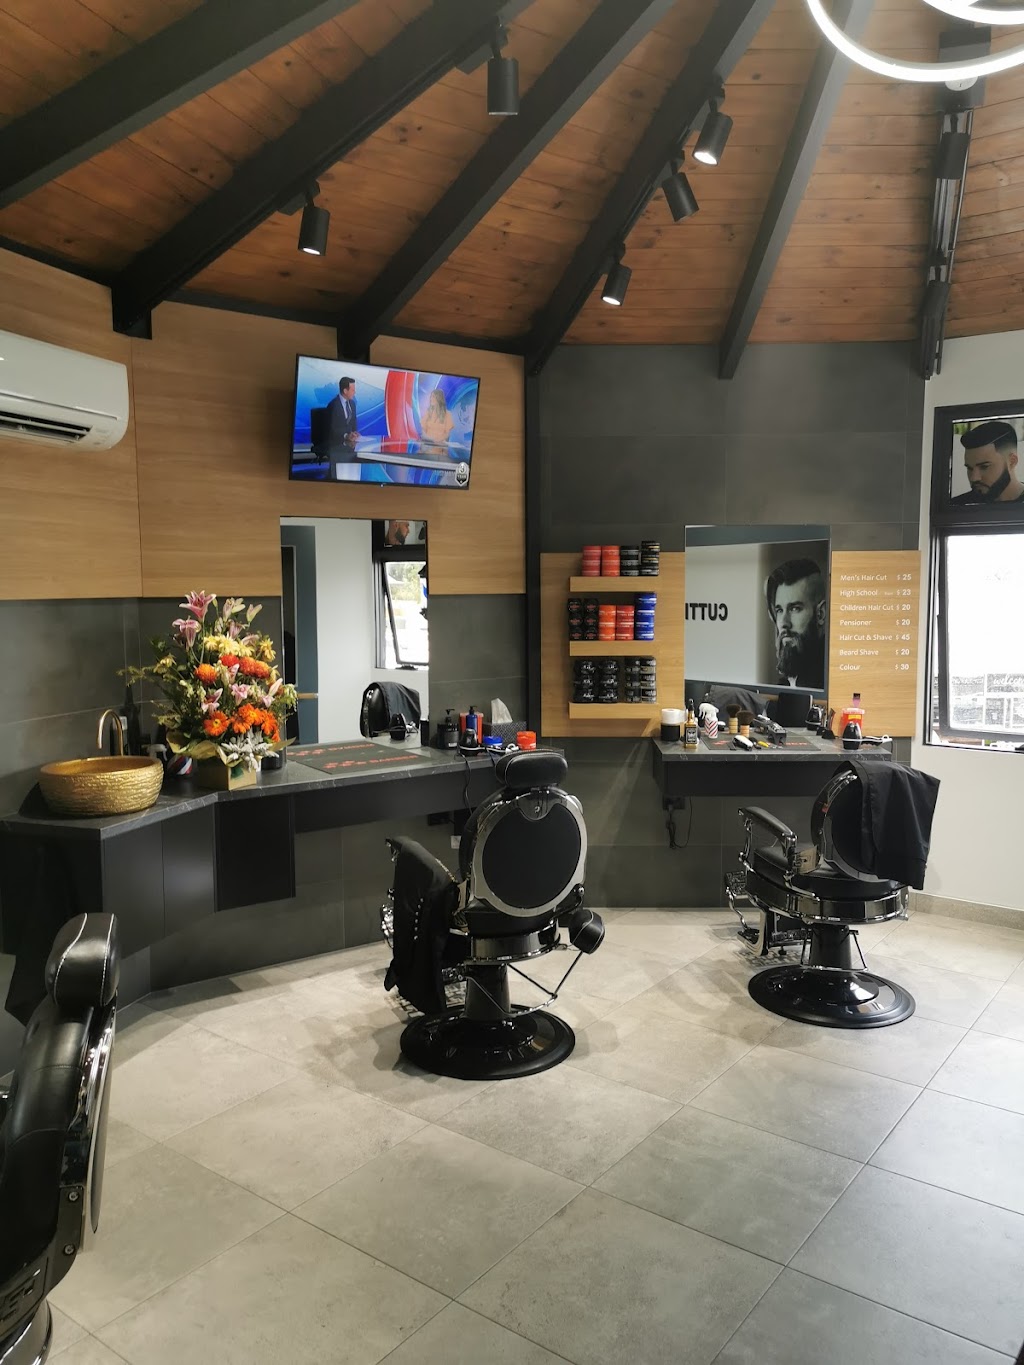 Cutting crew barber shop | Tra ding as crest HOTEL barber, 114 Princes Hwy, Sylvania NSW 2224, Australia | Phone: 0490 063 278